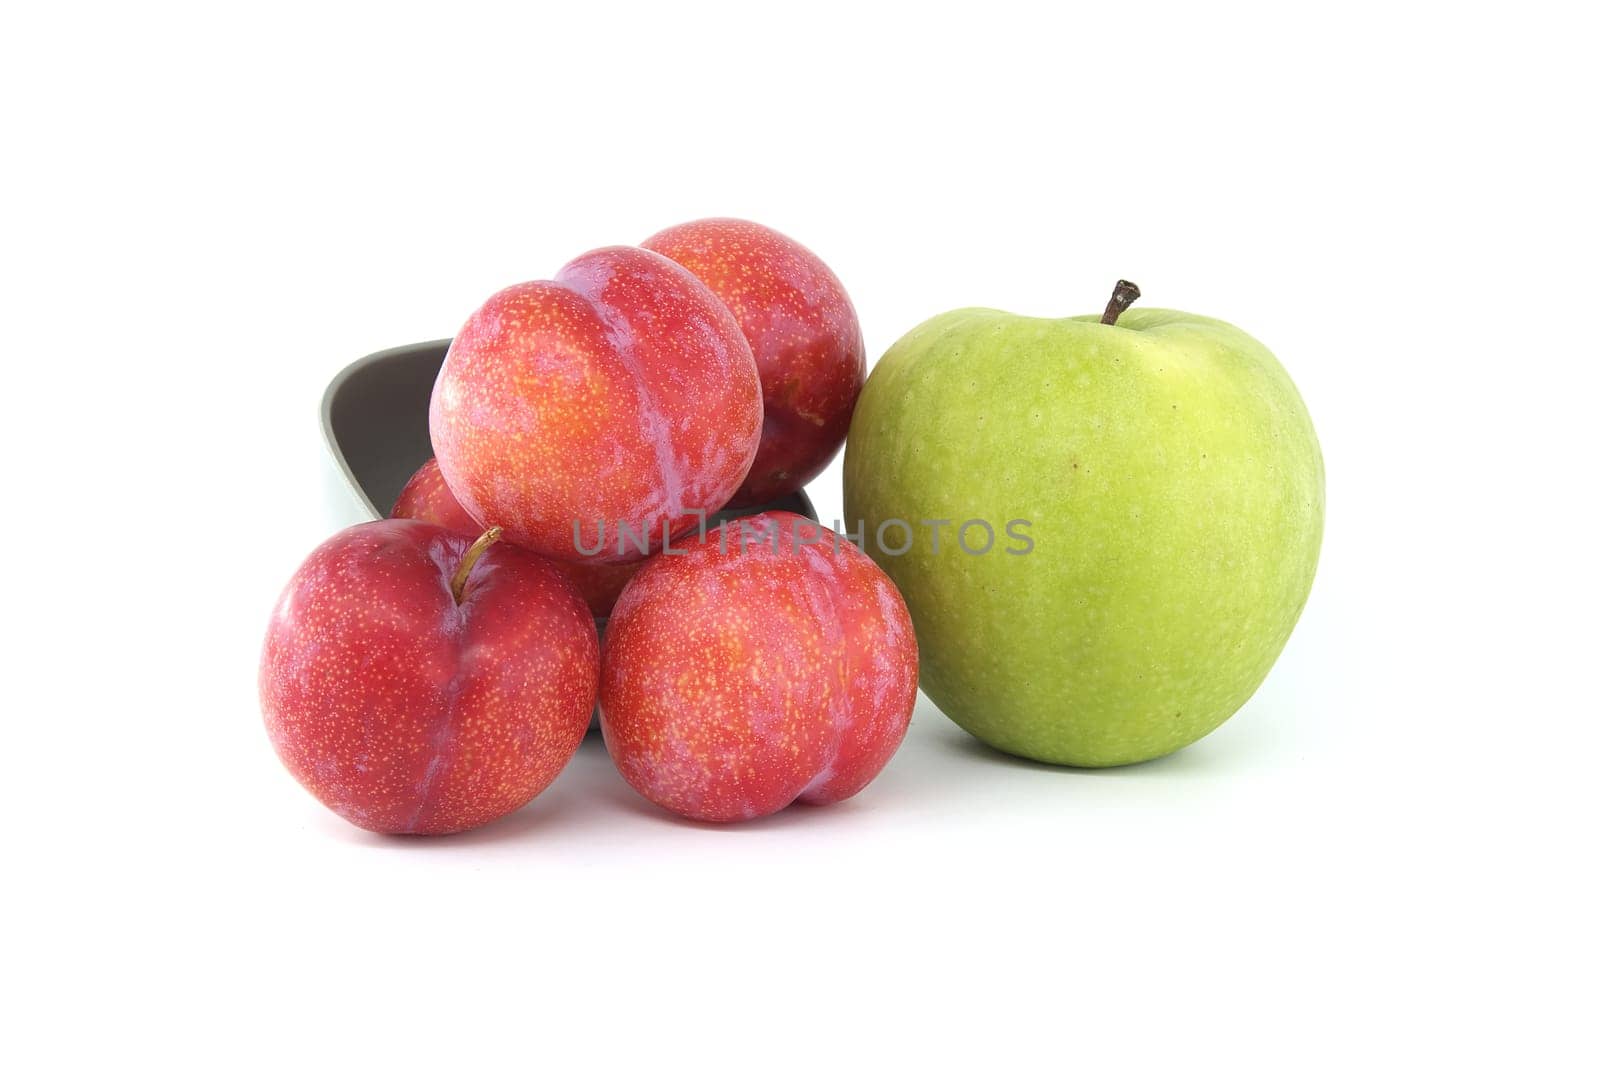 Red plums and green apple isolated on white background by NetPix